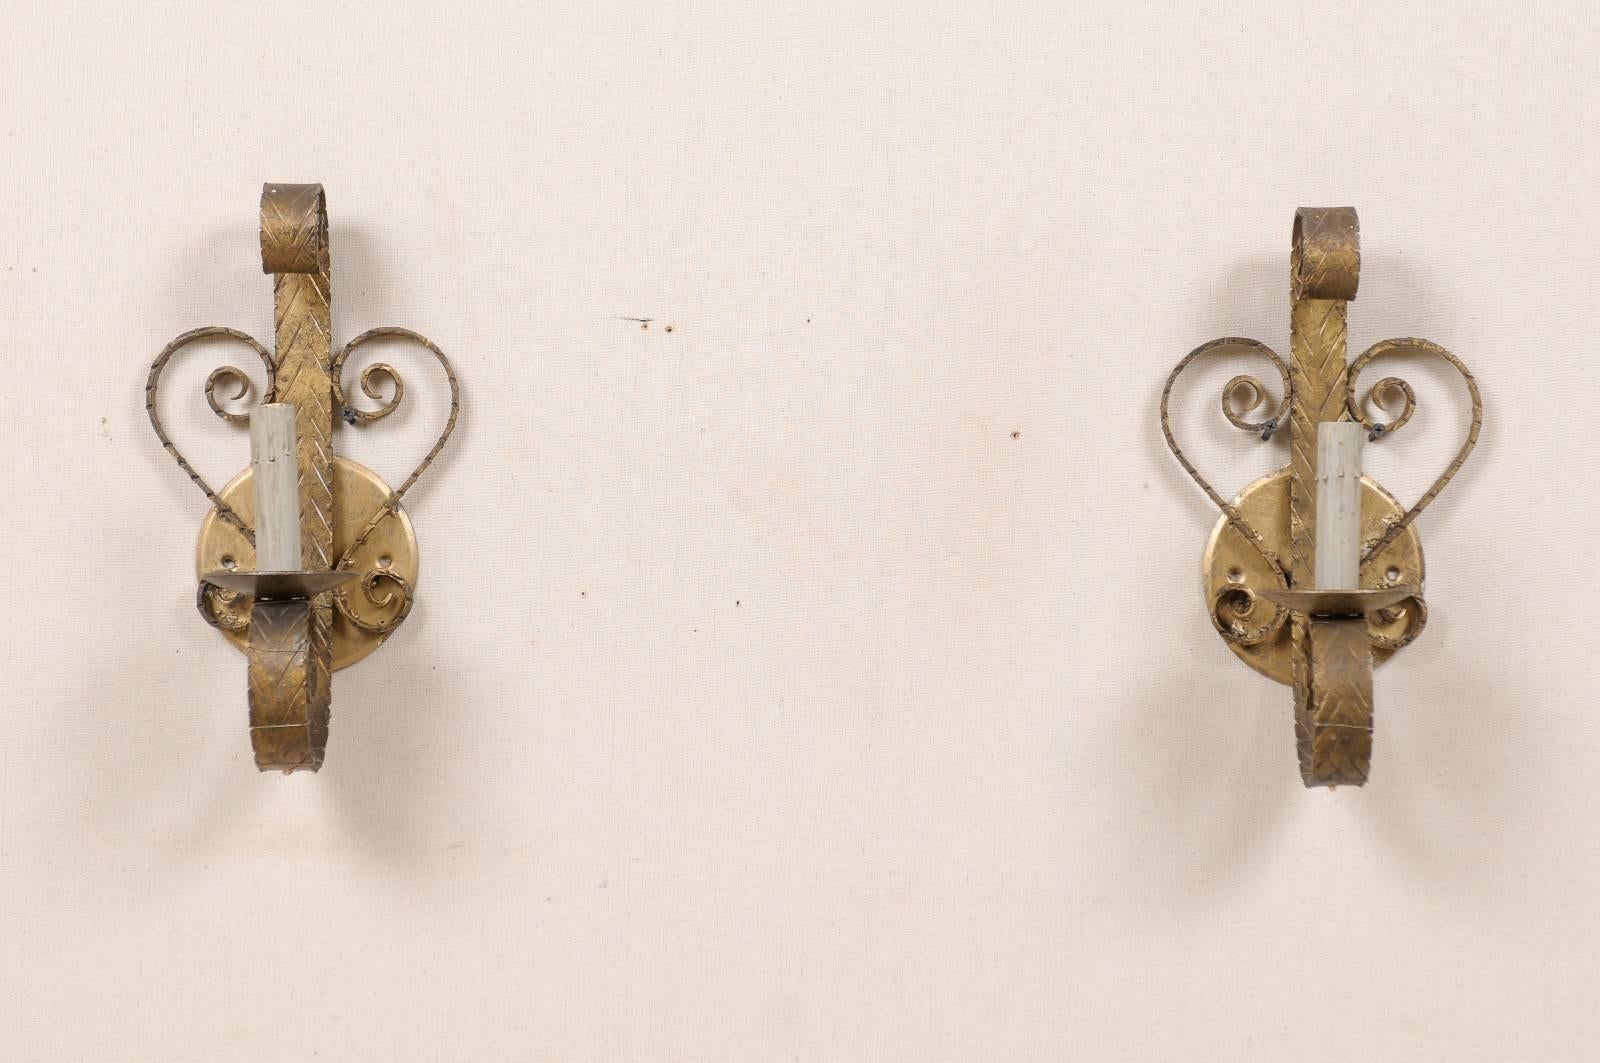 A pair of Spanish painted gold forged iron single light sconces from the mid-20th century. Each sconce features a central scroll attached to the backplate. Each sconce is also decorated with S-scroll motifs on either side creating a heart shaped